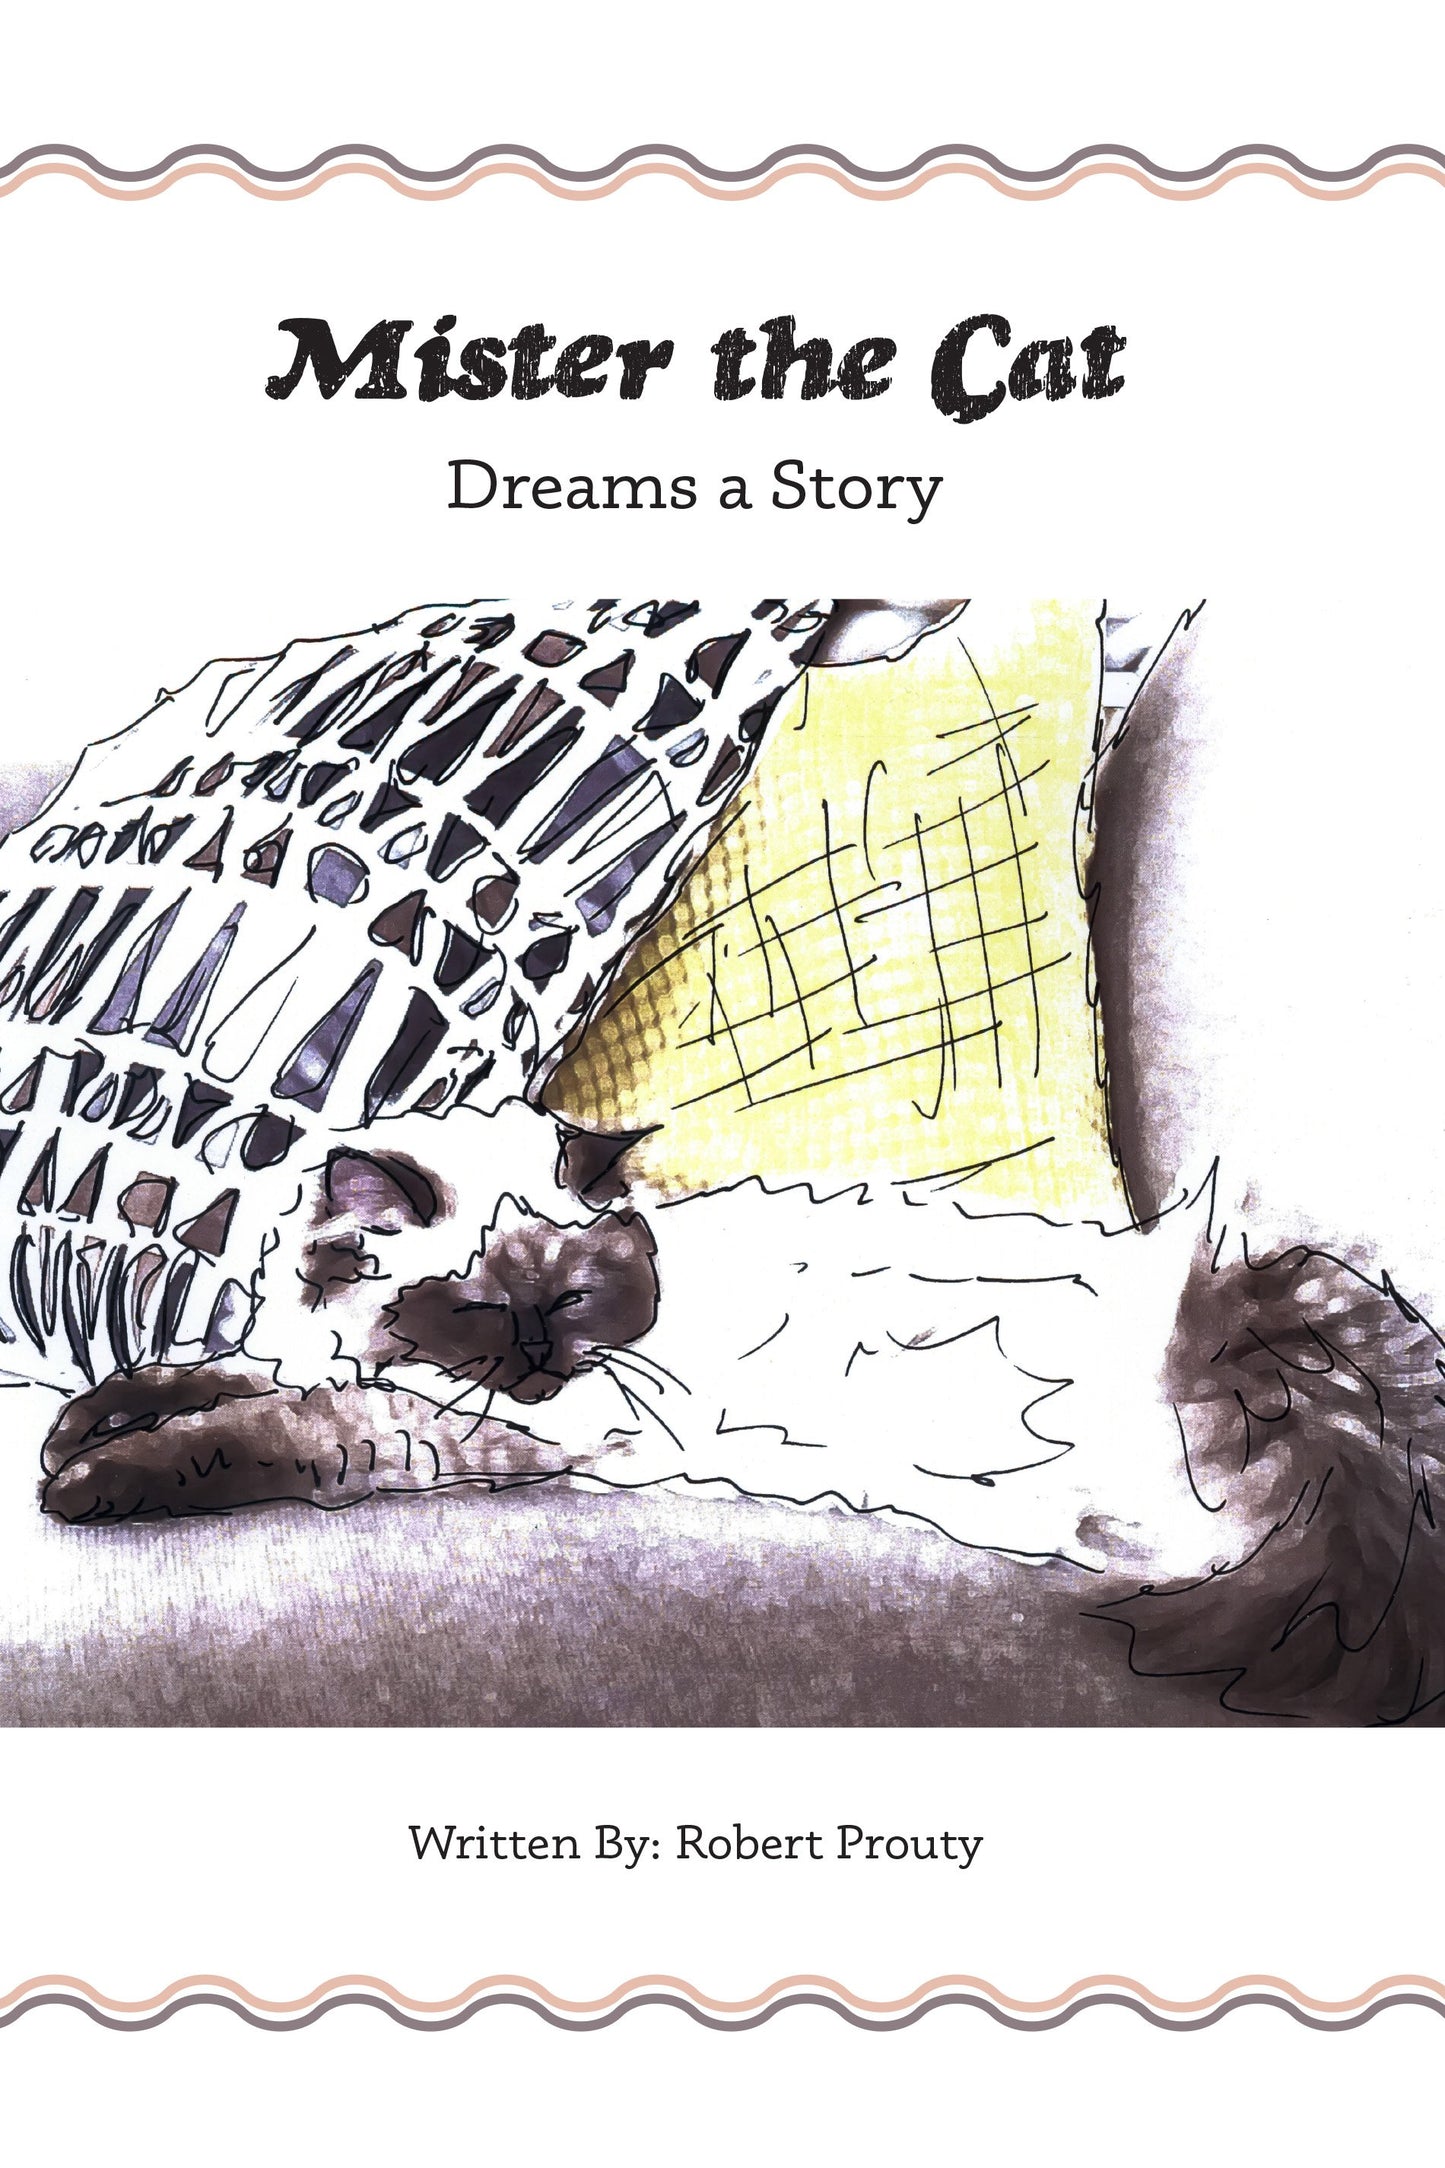 Mister the Cat Dreams a Story